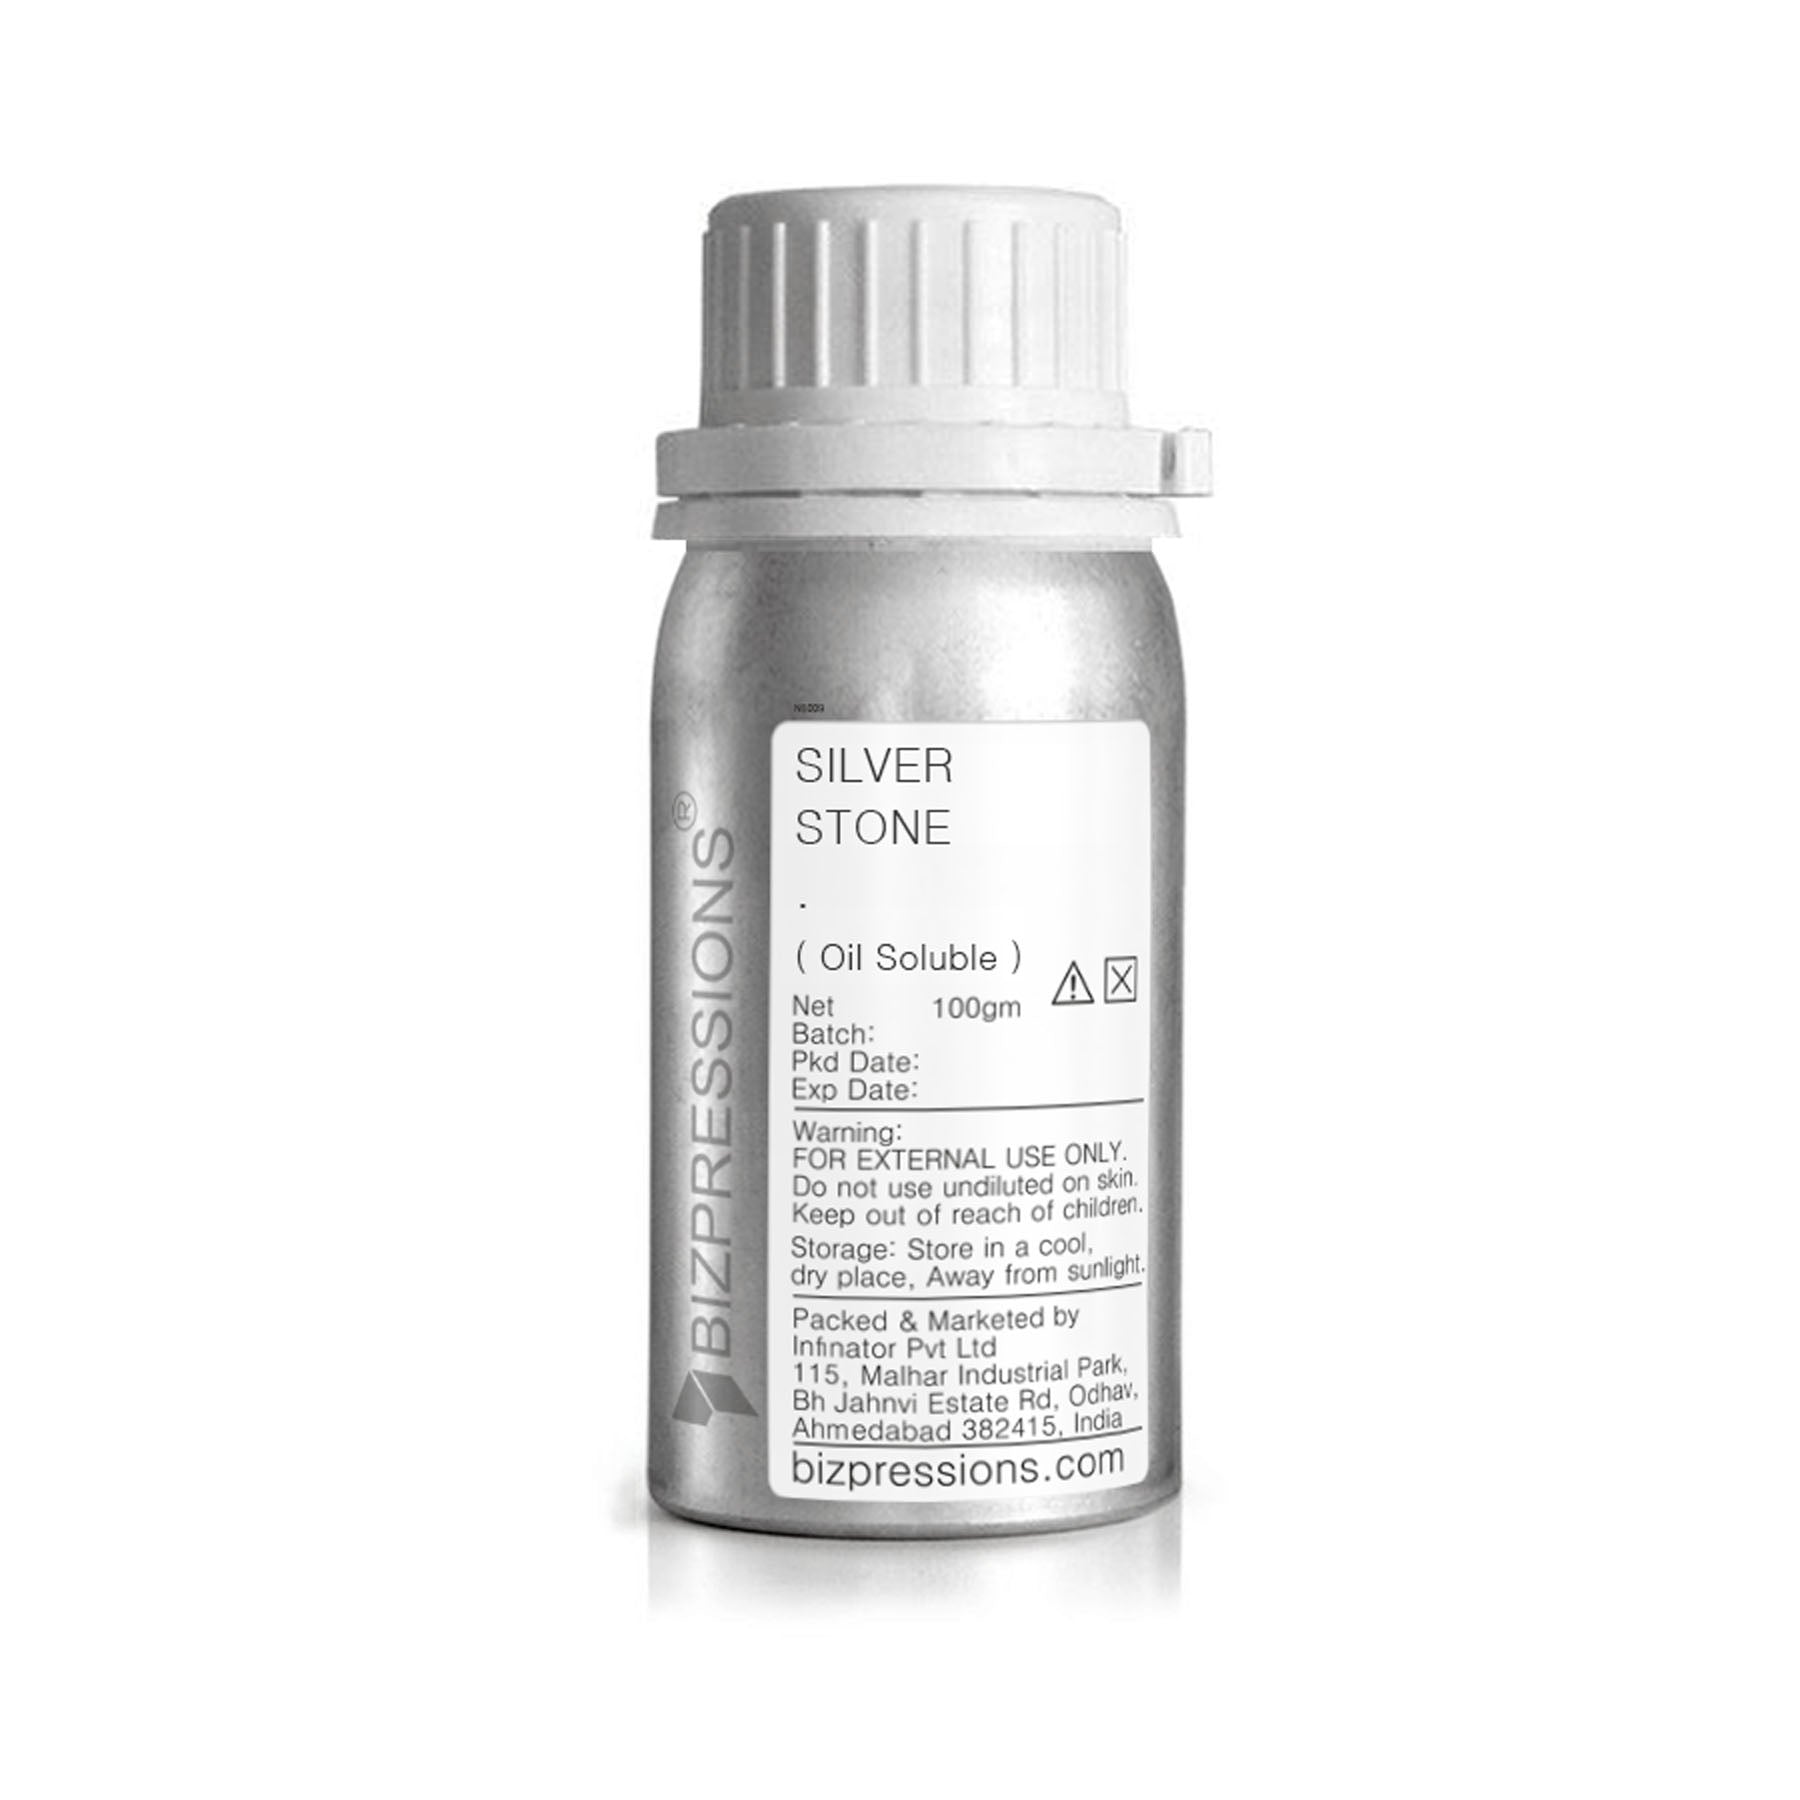 SILVER STONE - Fragrance ( Oil Soluble ) - 100 gm